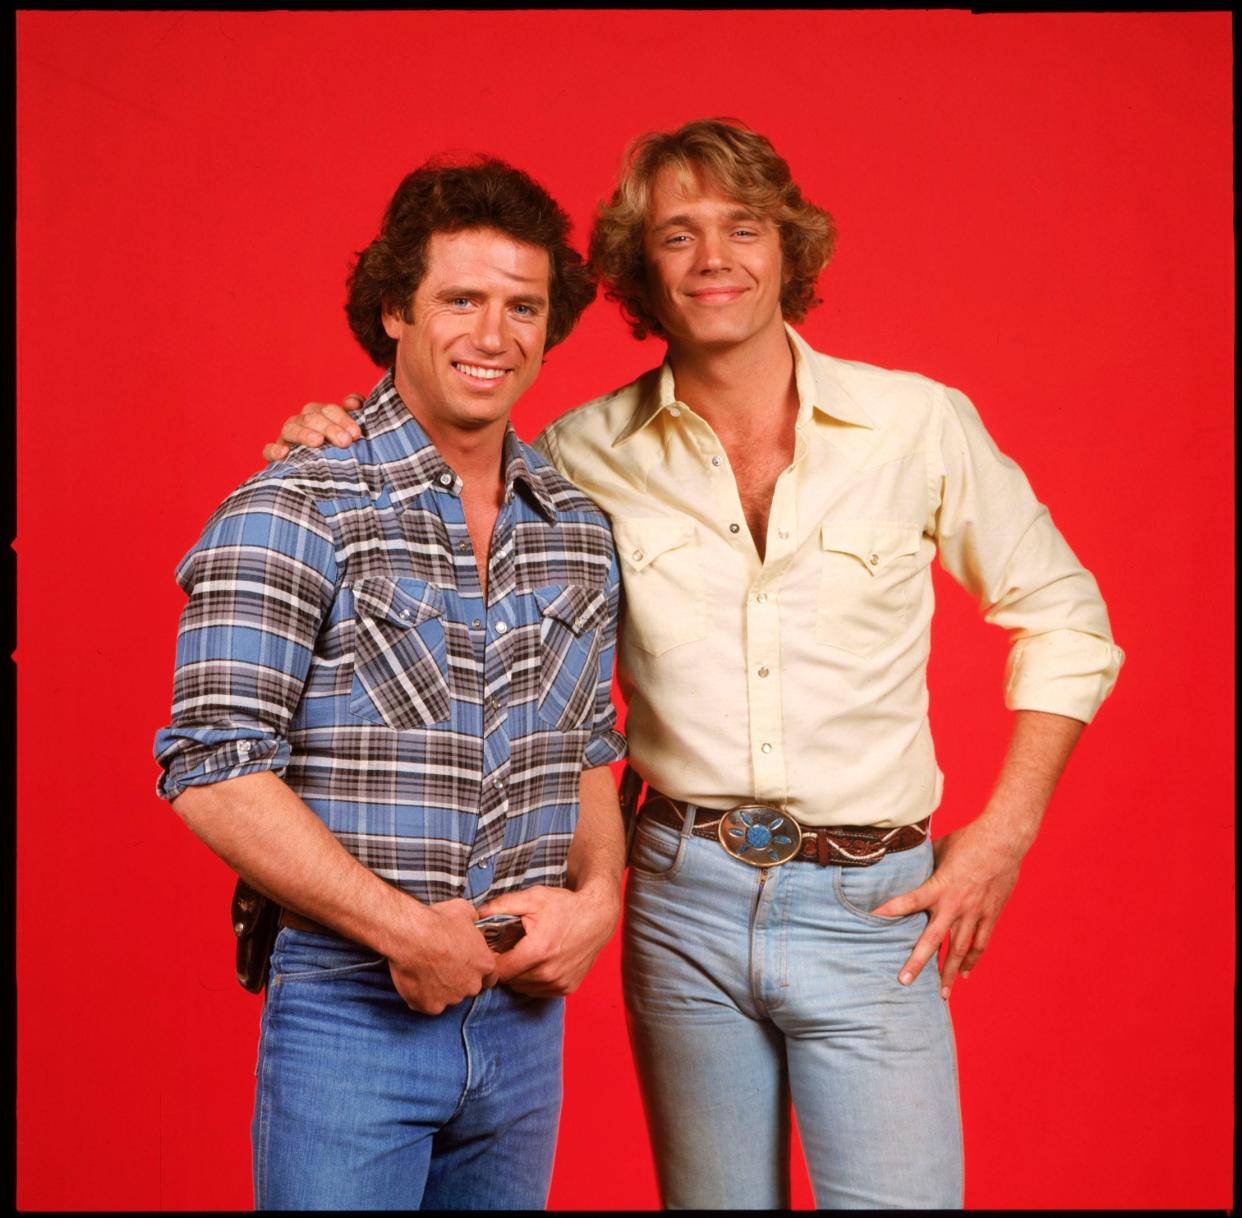 Tom Wopat, left, and John Schneider outwitted local law enforcement together on CBS' 'The Dukes of Hazzard.'